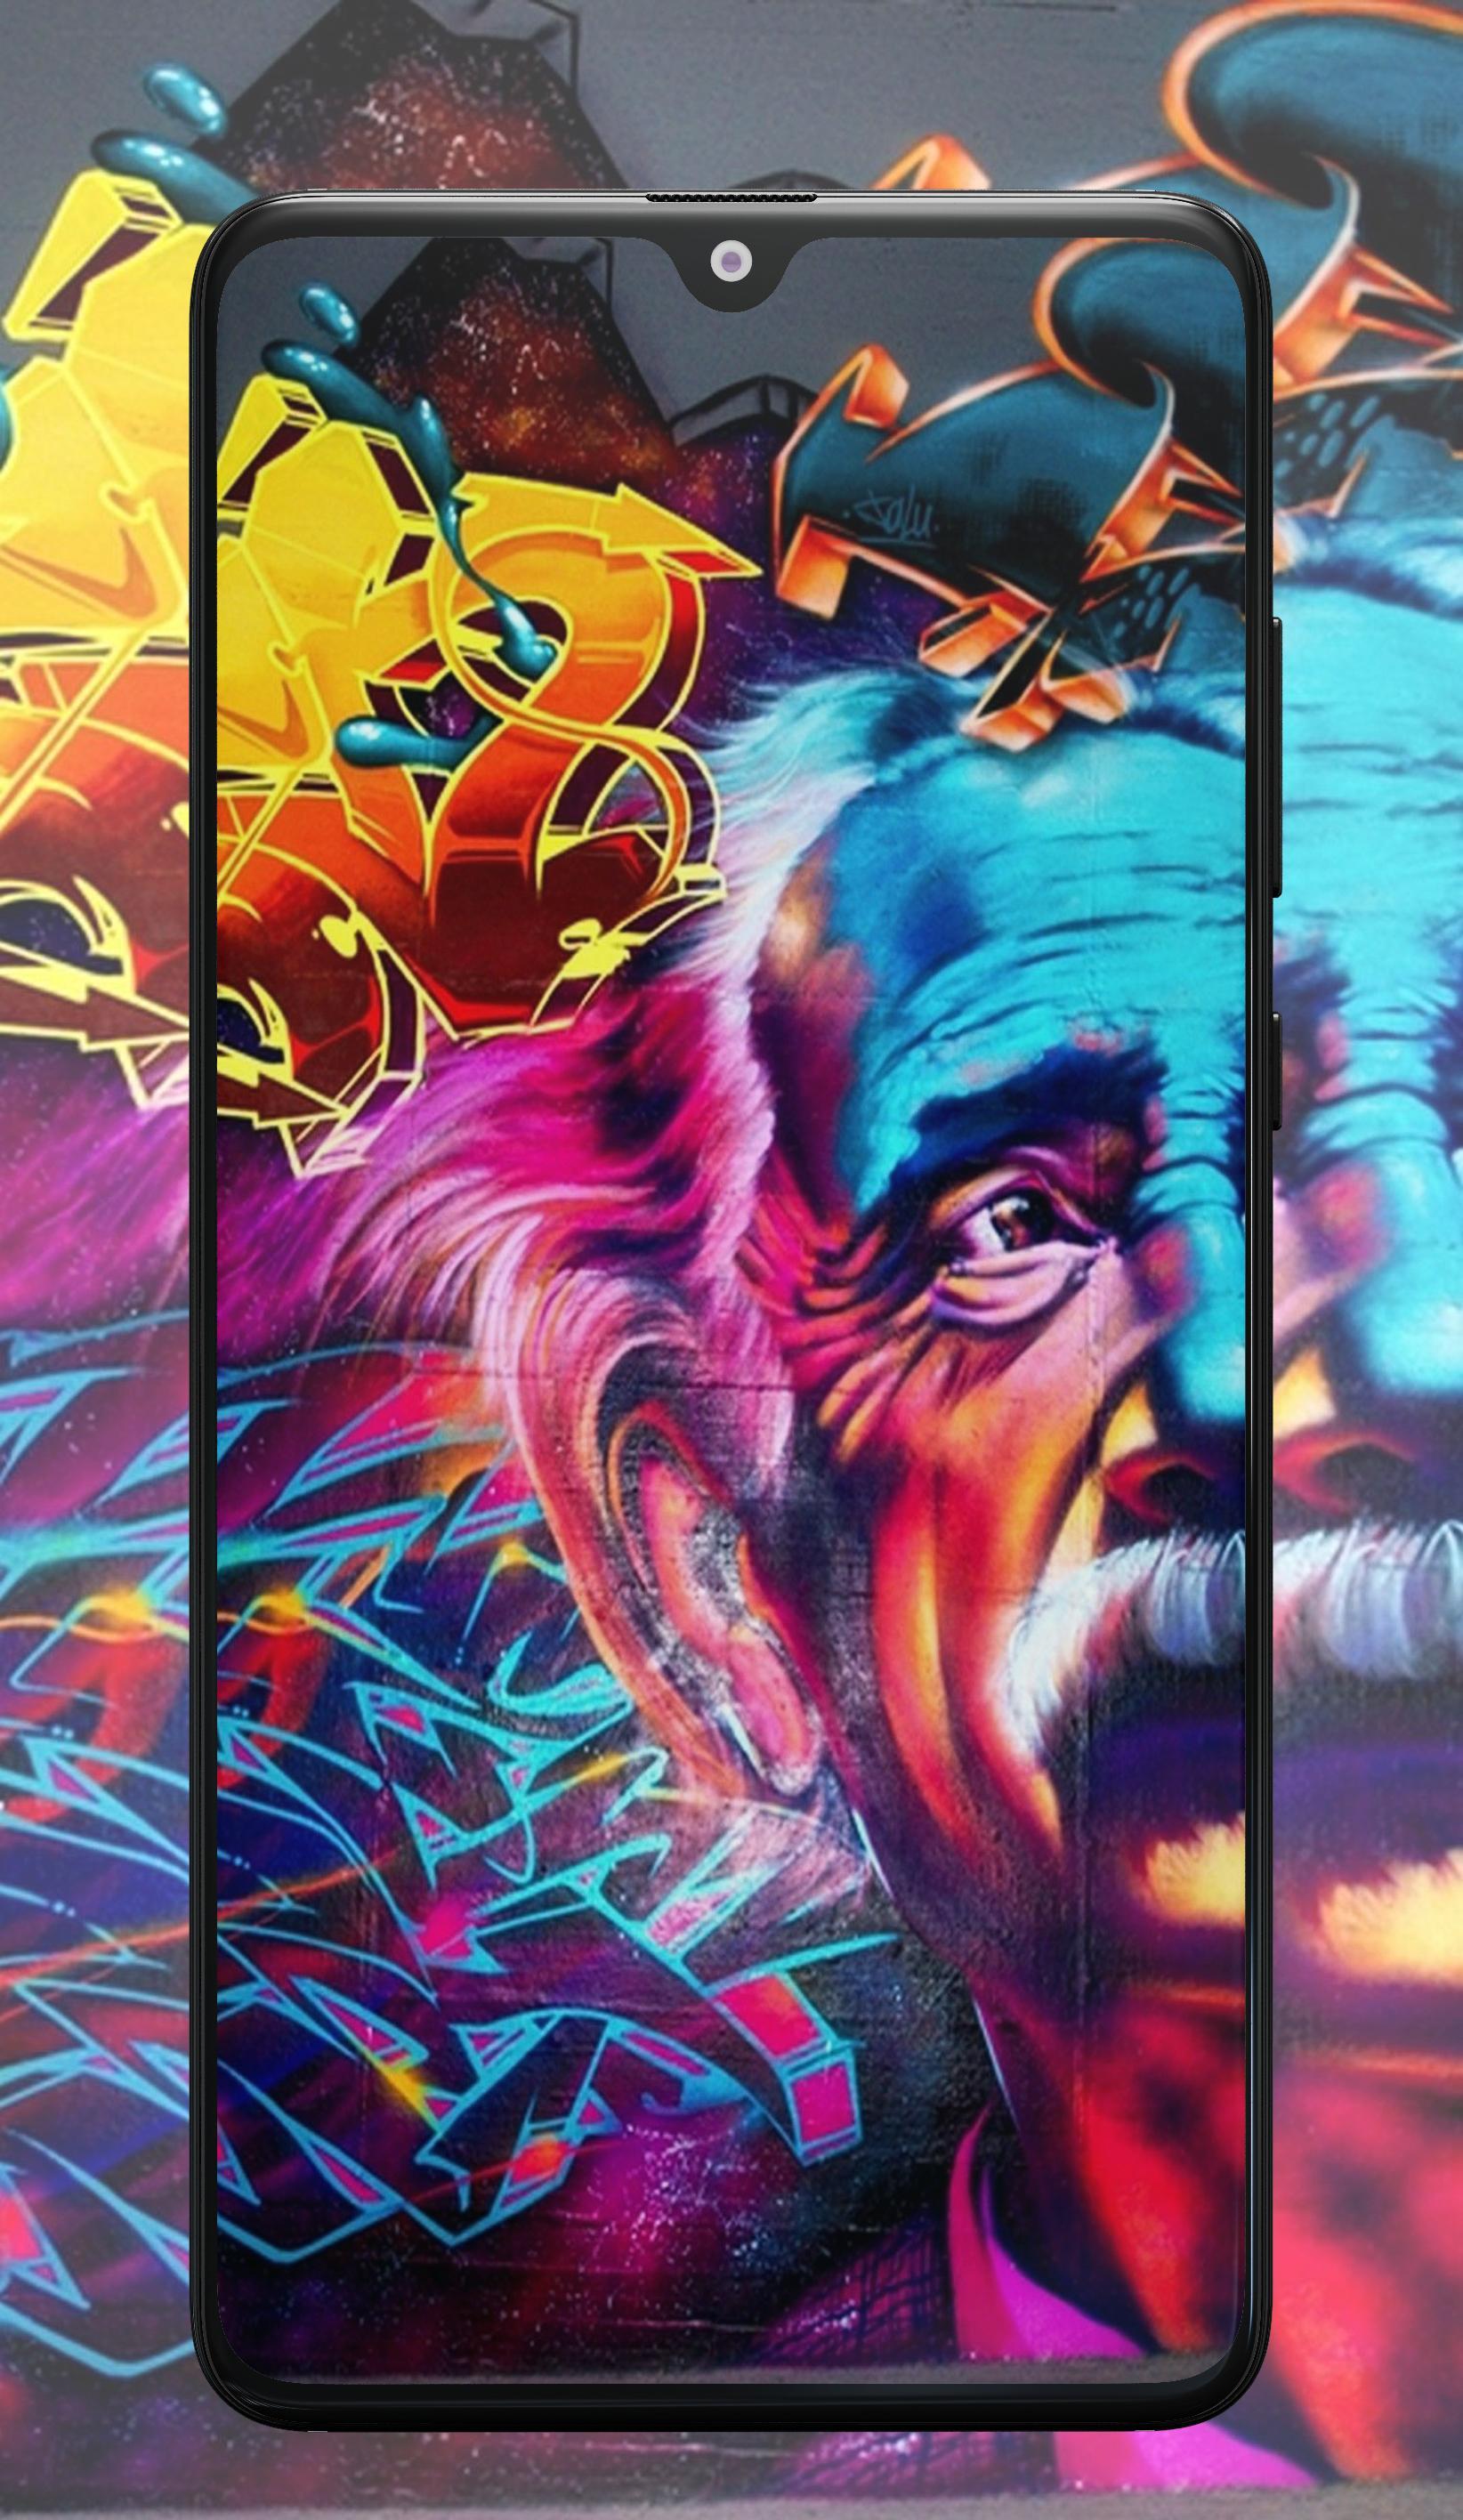 Graffiti Wallpaper For Android Apk Download